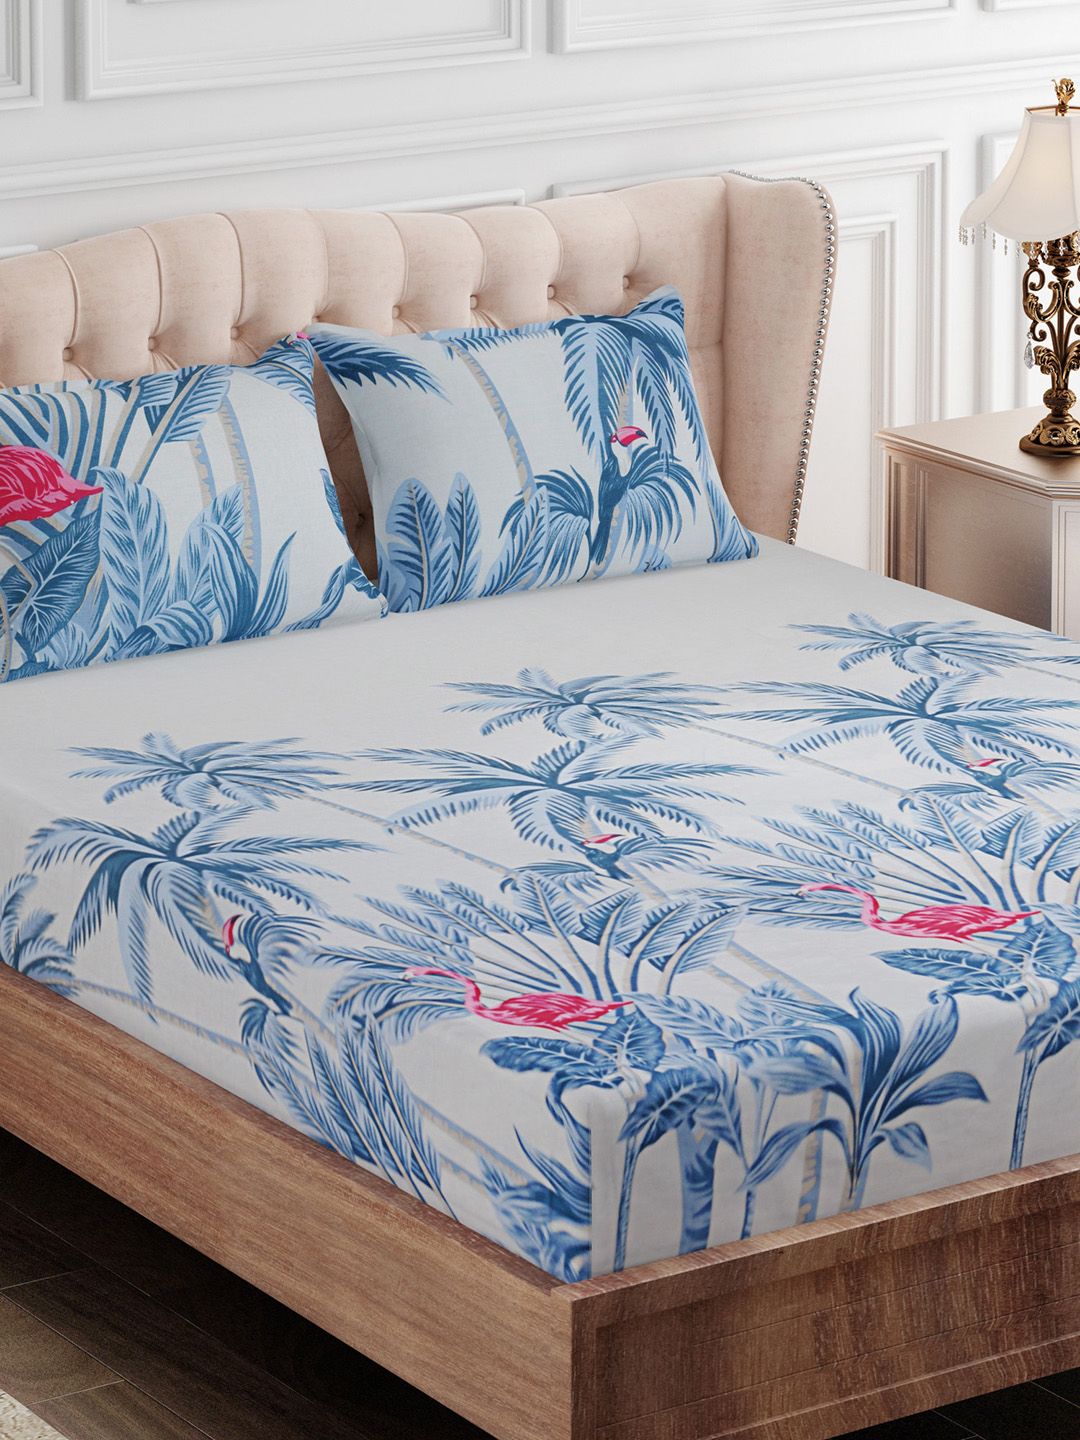 SEJ by Nisha Gupta Blue & Red Floral 180 TC King Bedsheet with 2 Pillow Covers Price in India